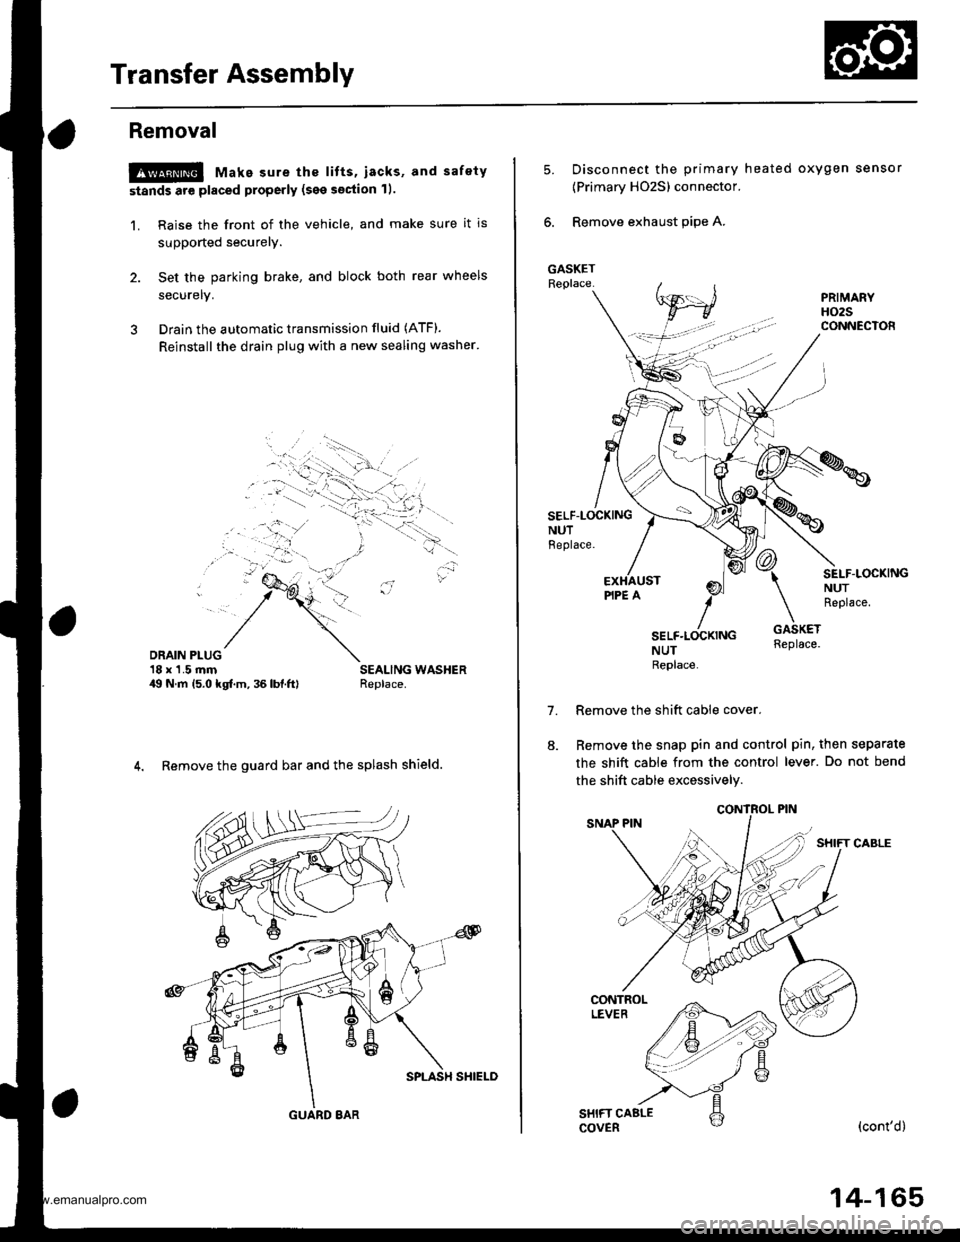 HONDA CR-V 1999 RD1-RD3 / 1.G Workshop Manual 
Transfer Assembly
Removal
@ Make sure the lifts, iacks, and safety
stands are placed properly (see section 11.
1. Raise the front of the vehicle, and make sure it is
supported securely.
2. Set the pa